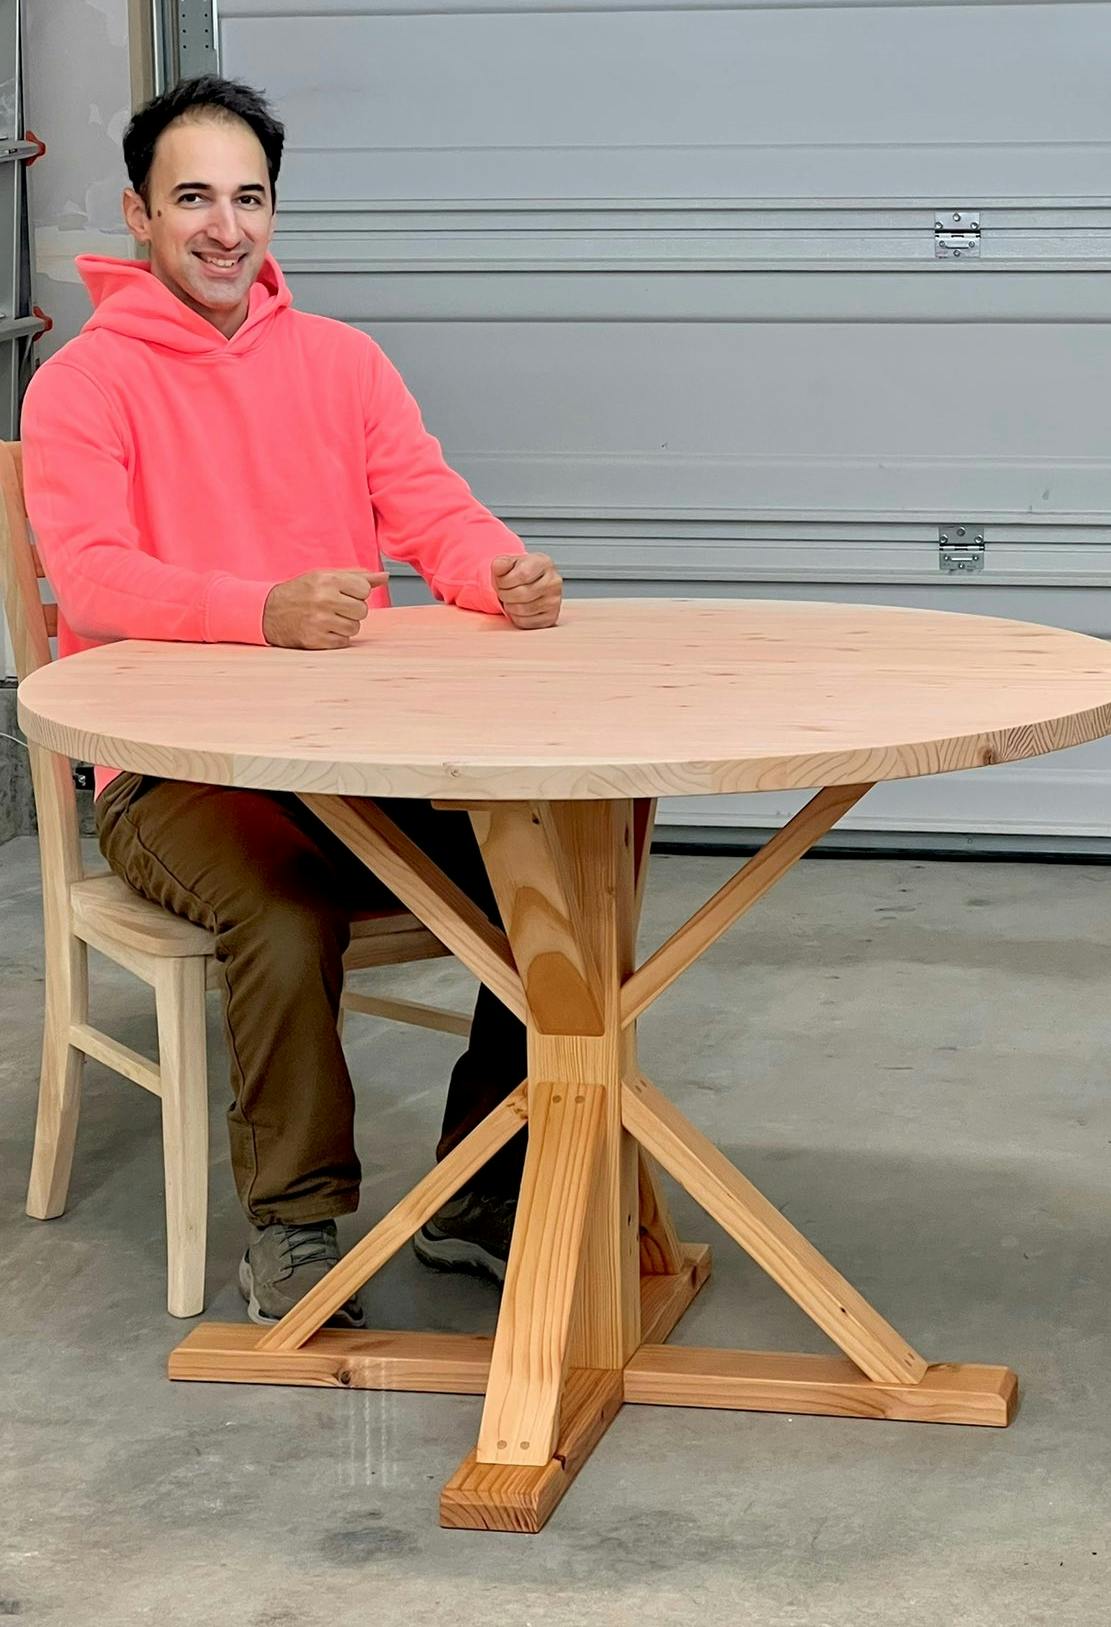 Daniel with a wooden table he built himself